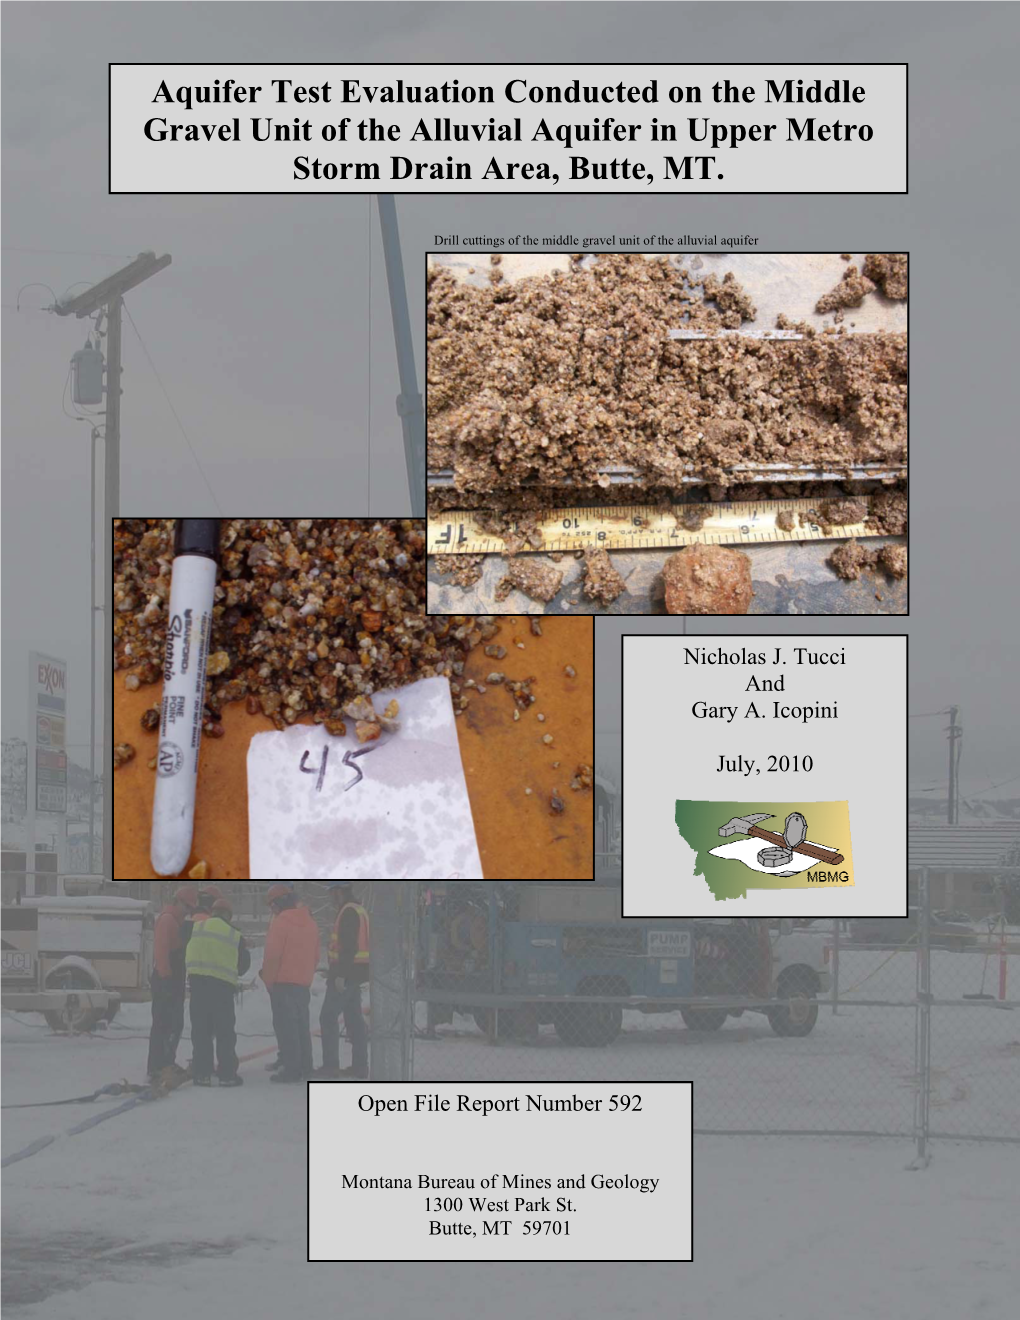 Aquifer Test Evaluation Conducted on the Middle Gravel Unit of the TABLE Alluvial of CONTENTS Aquifer in Upper Metro Storm Drain Area, Butte, MT